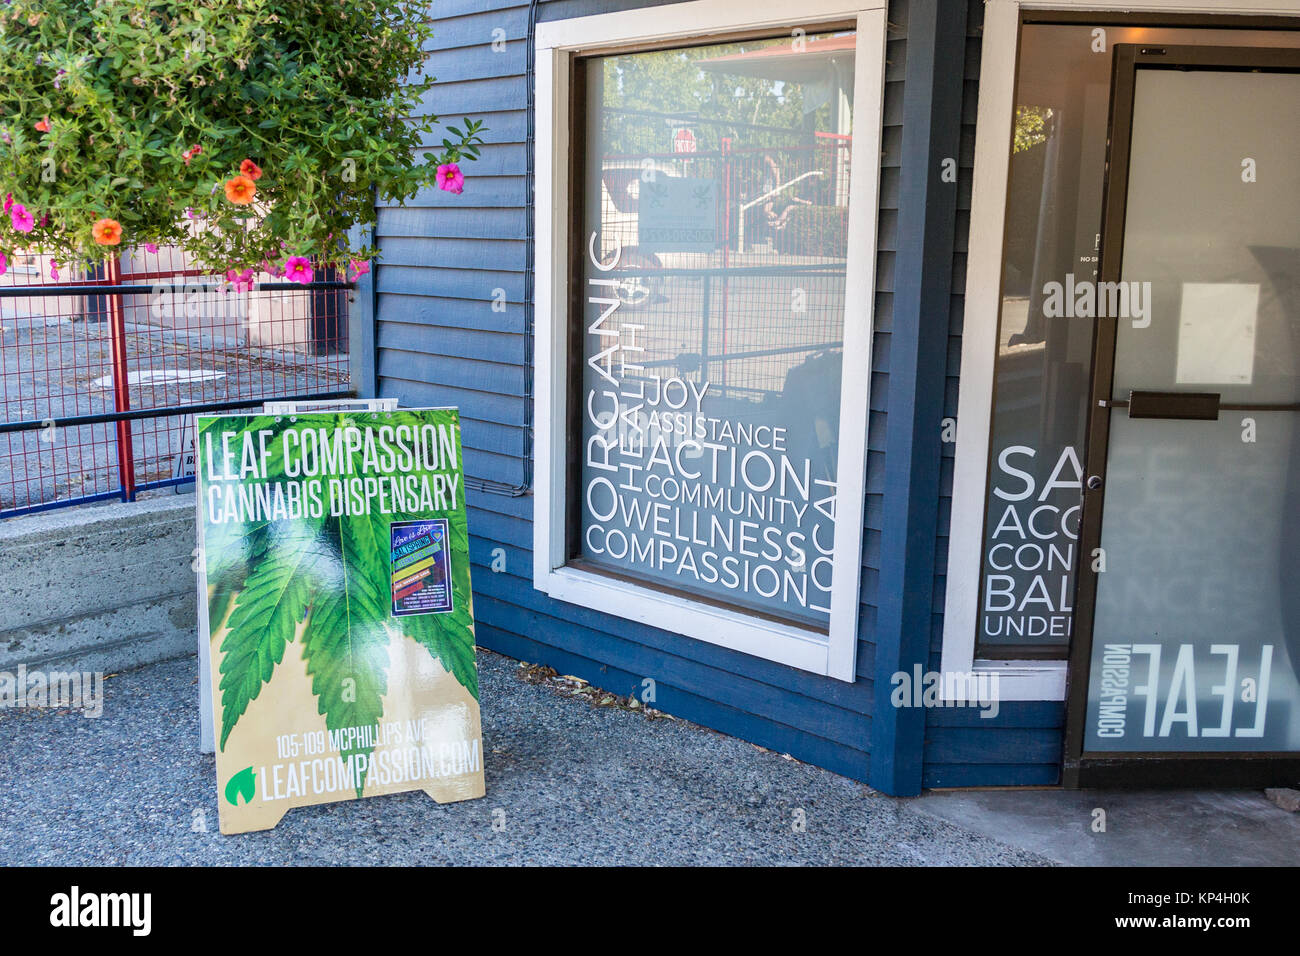 Salt Spring Island, Canada - August 28th, 2017: The entrance of the Salt Spring Compassion cannabis dispensary in Salt Spring Island. Stock Photo